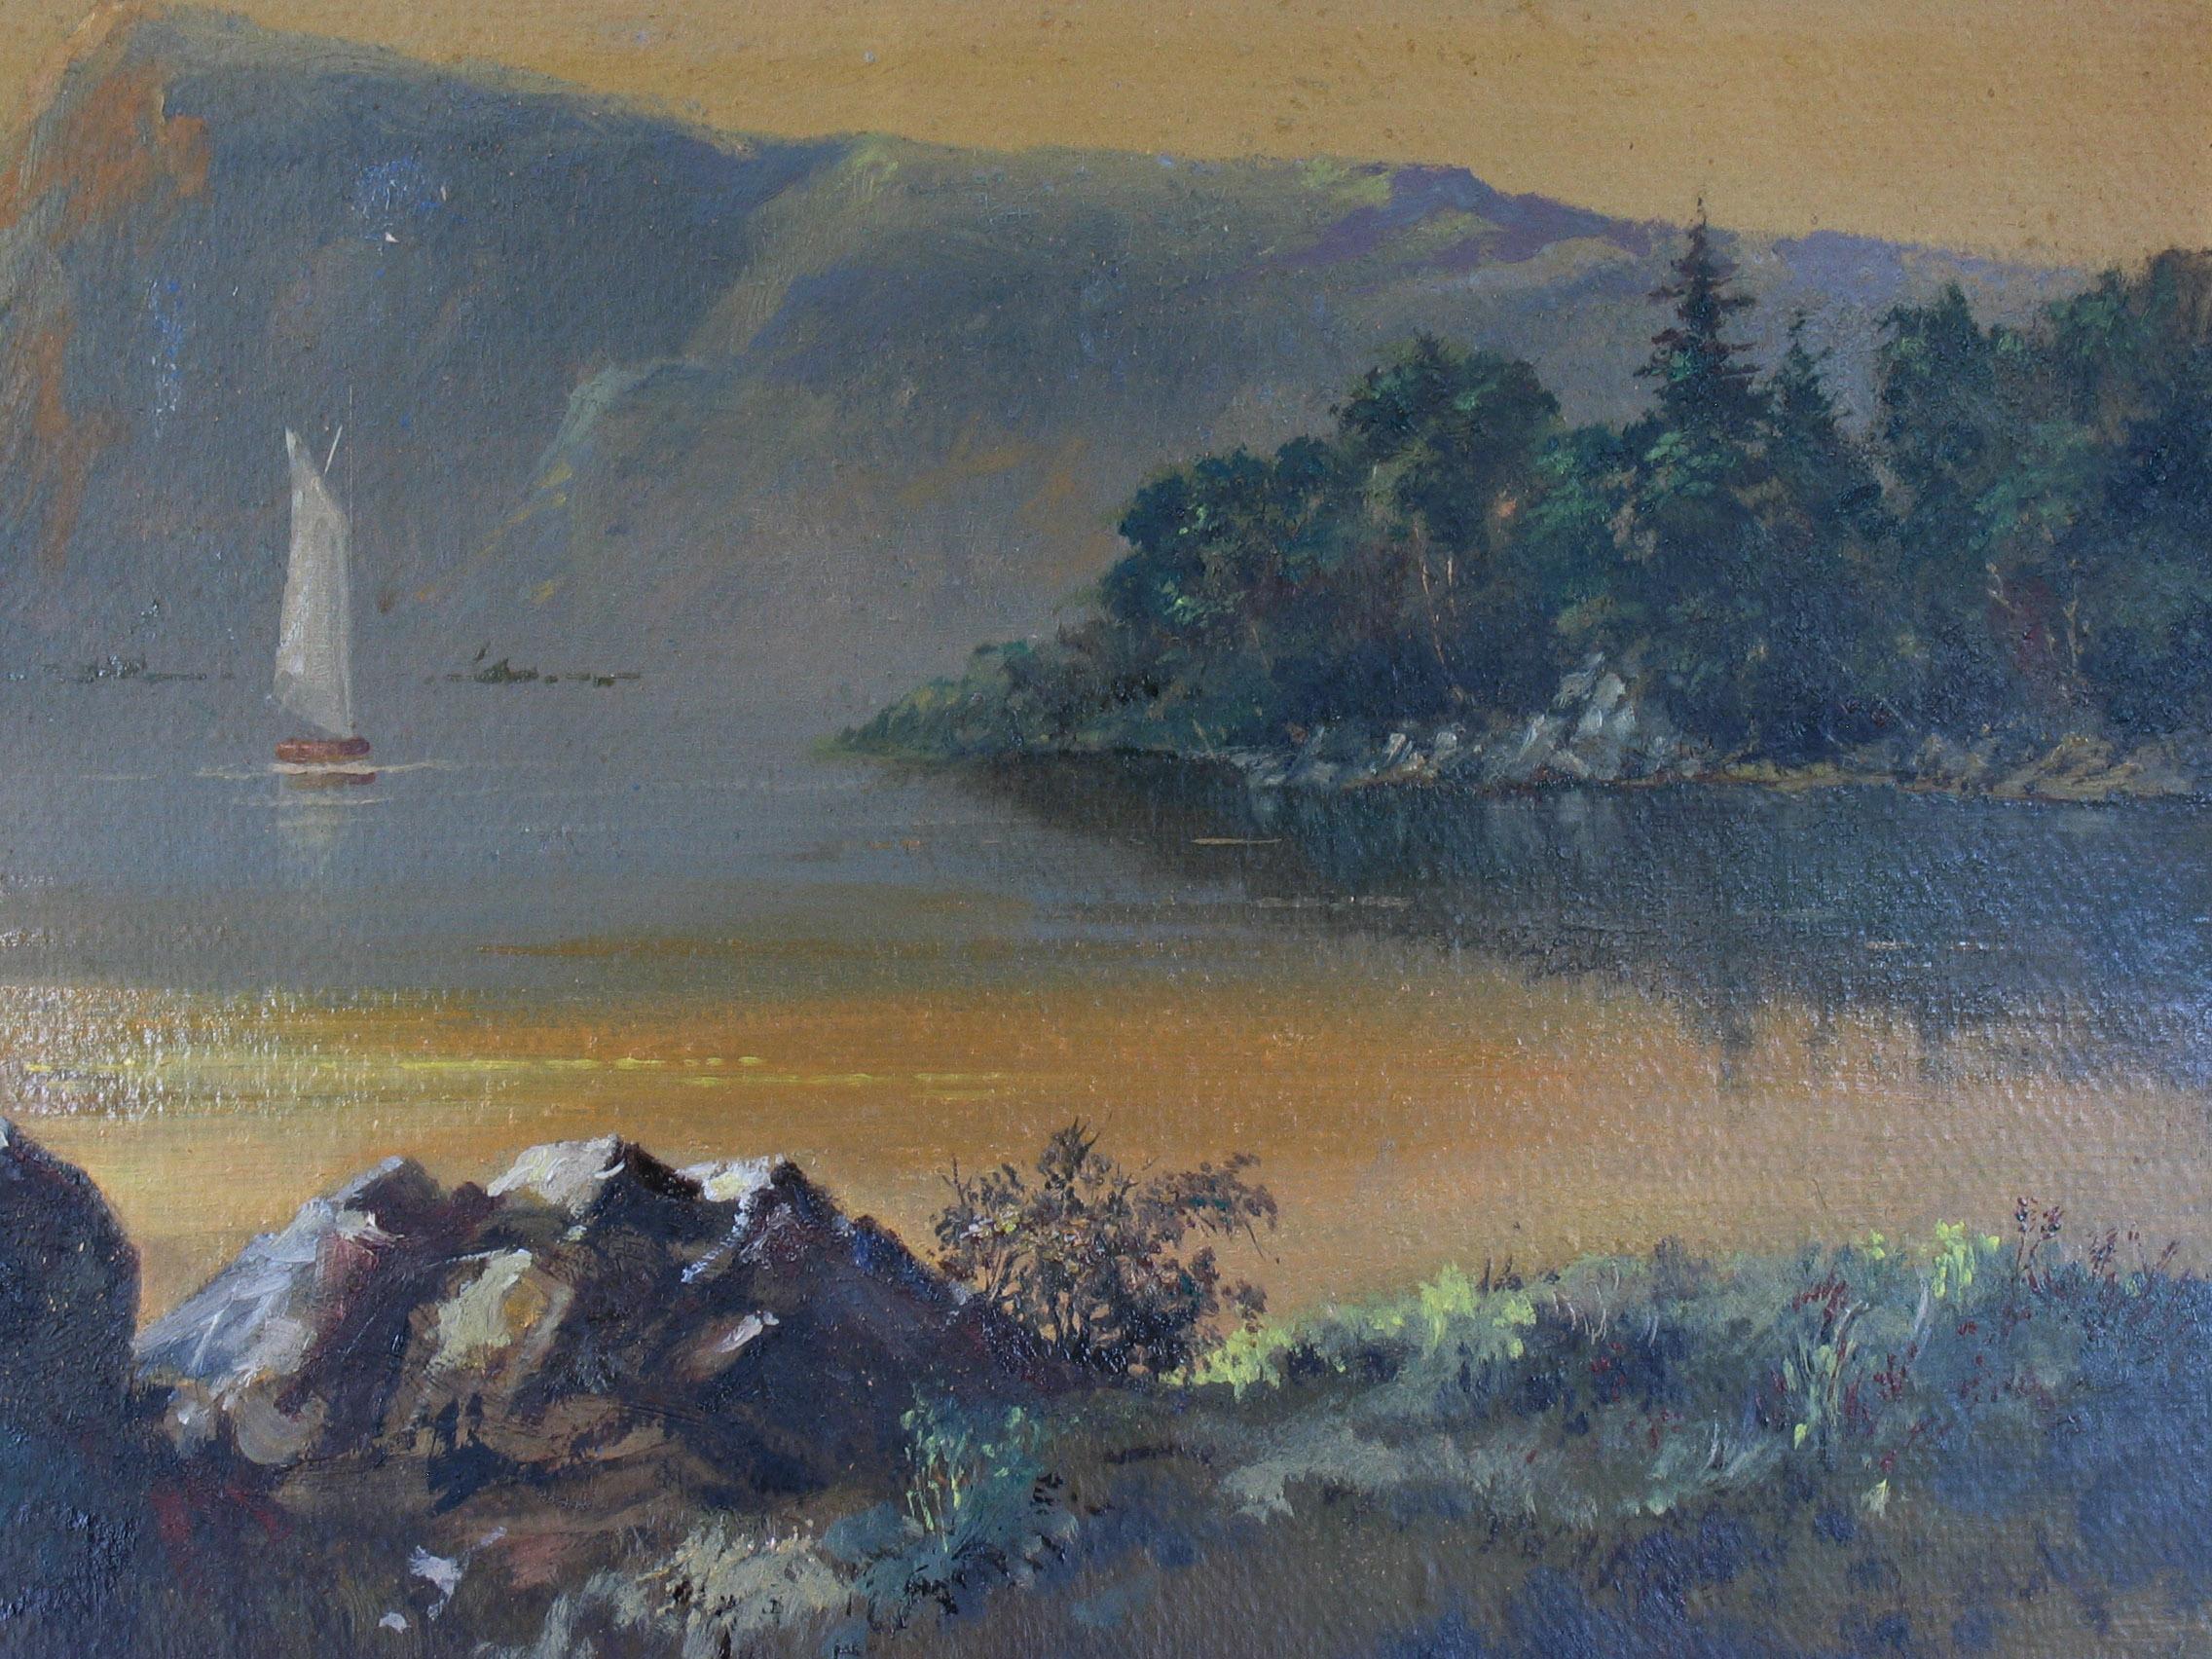 American Classical American Hudson River School Lake George Painting, 19th Century For Sale